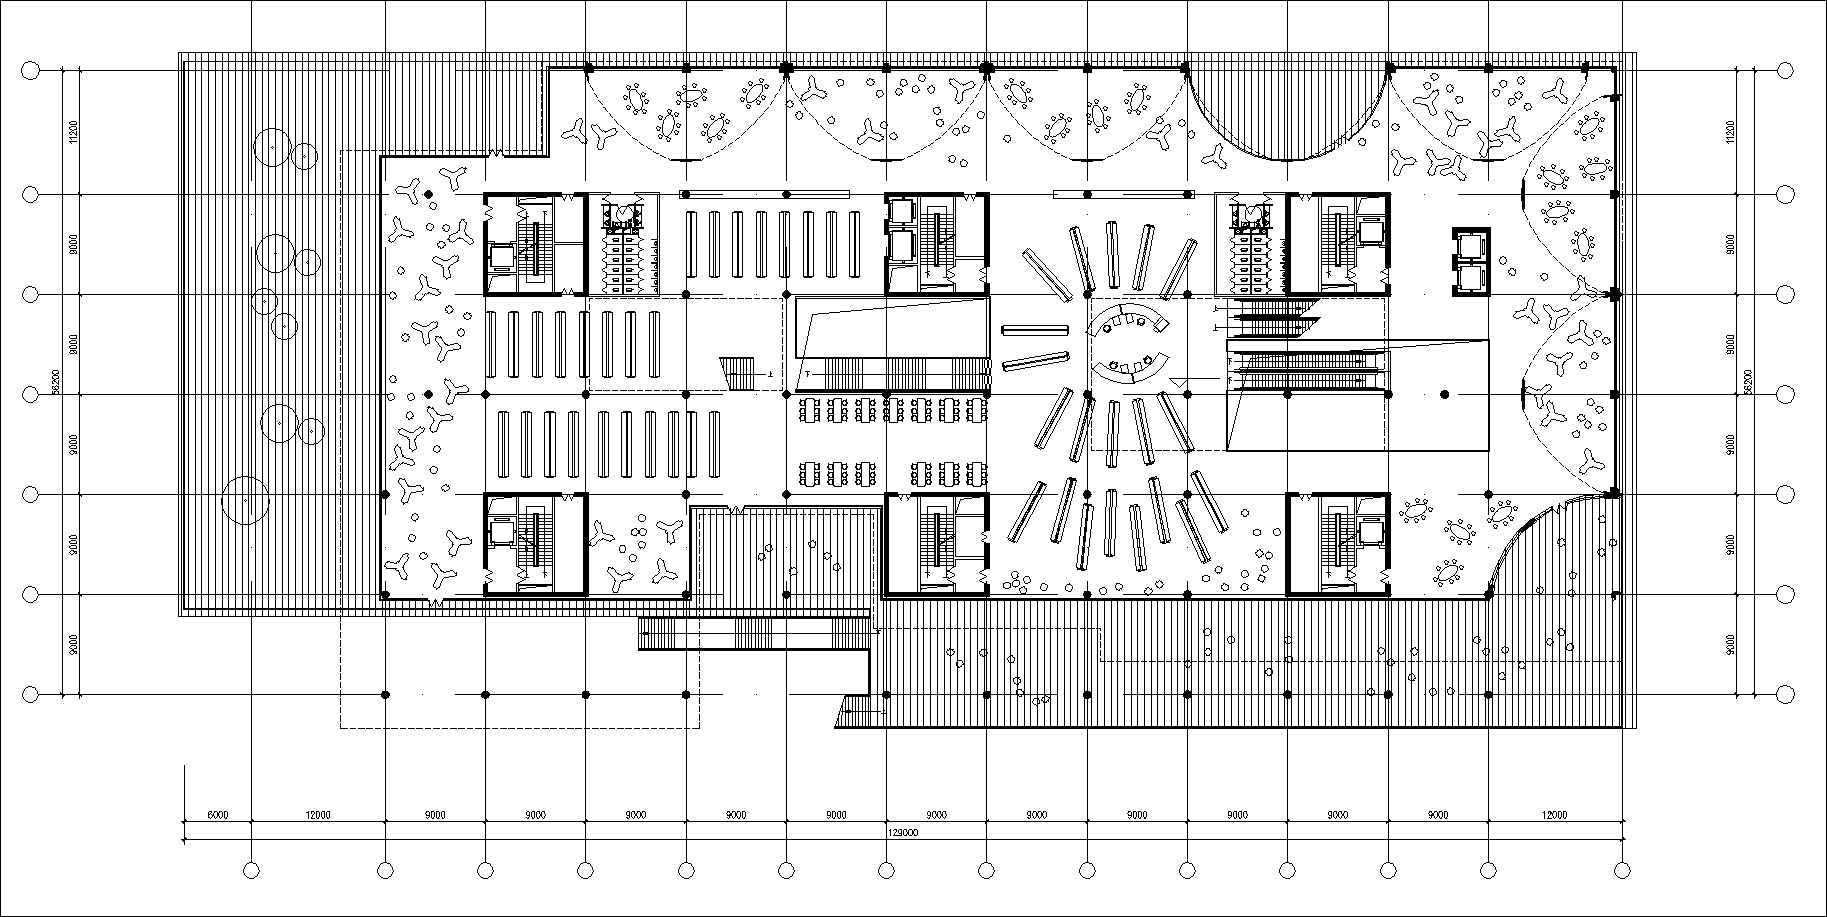 【Architecture CAD Projects】Library Design CAD Blocks,Plans,Layout V1